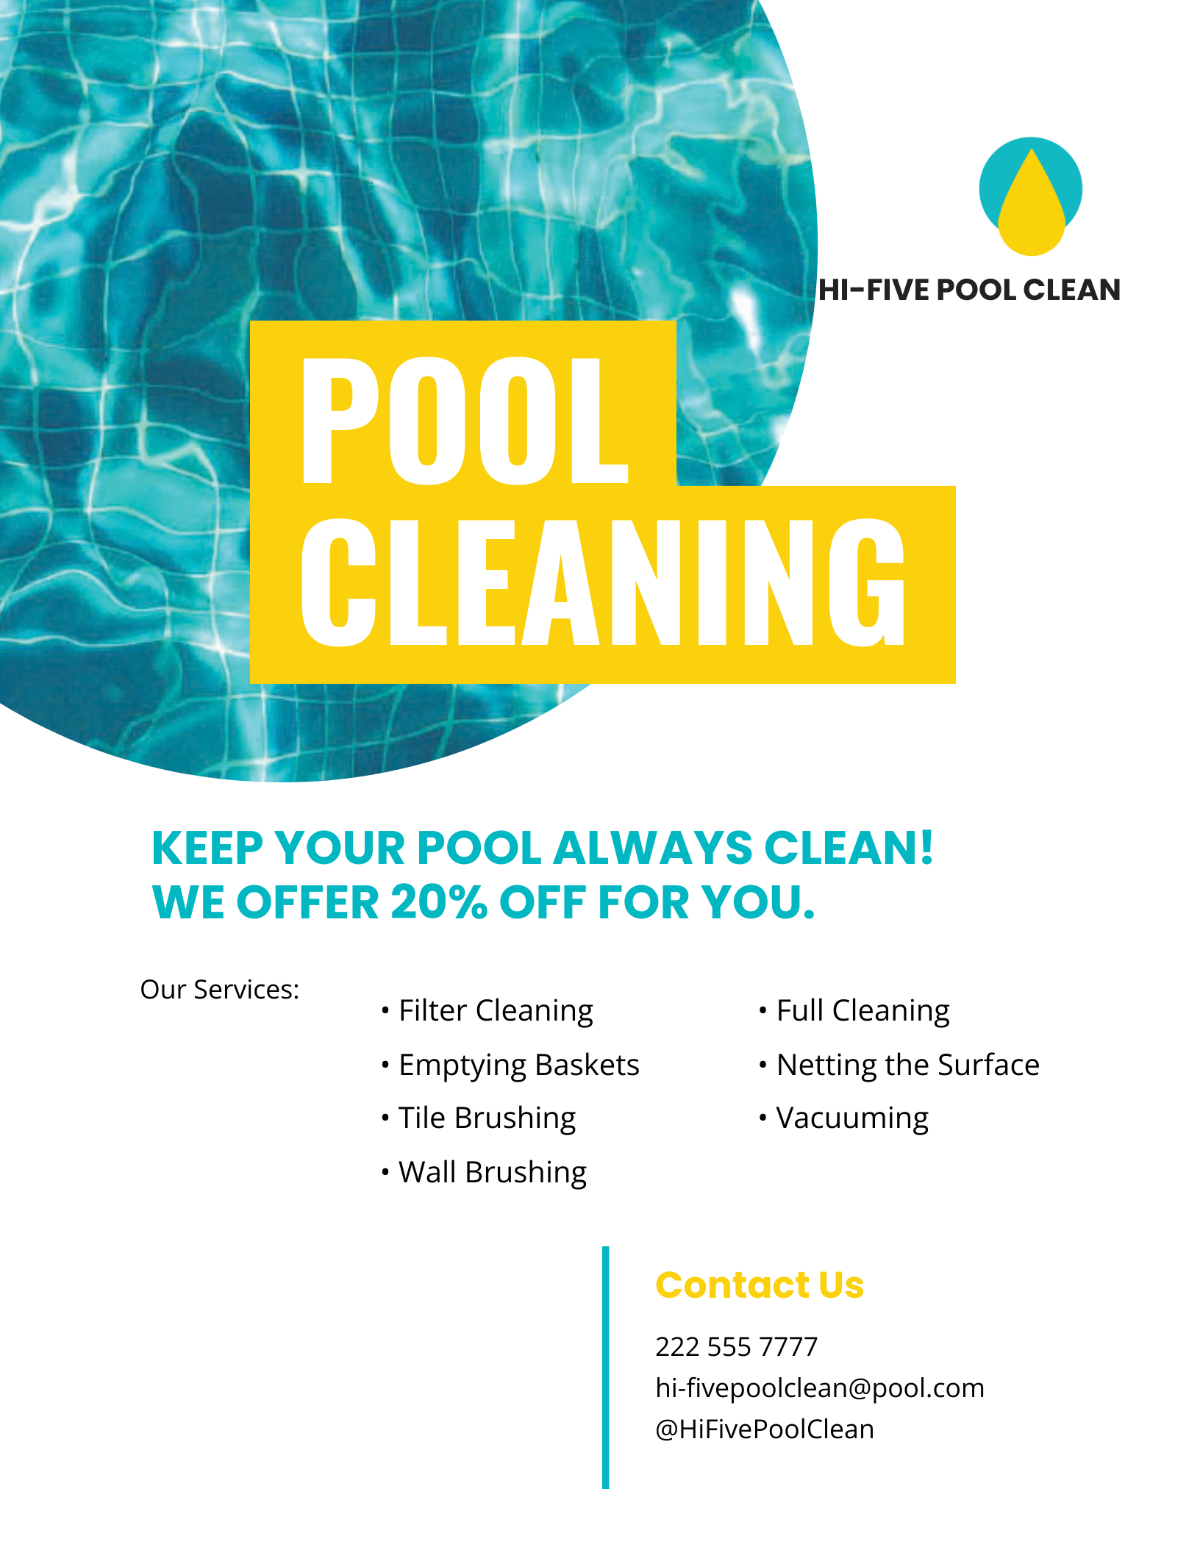 Pool Cleaning Service Flyer